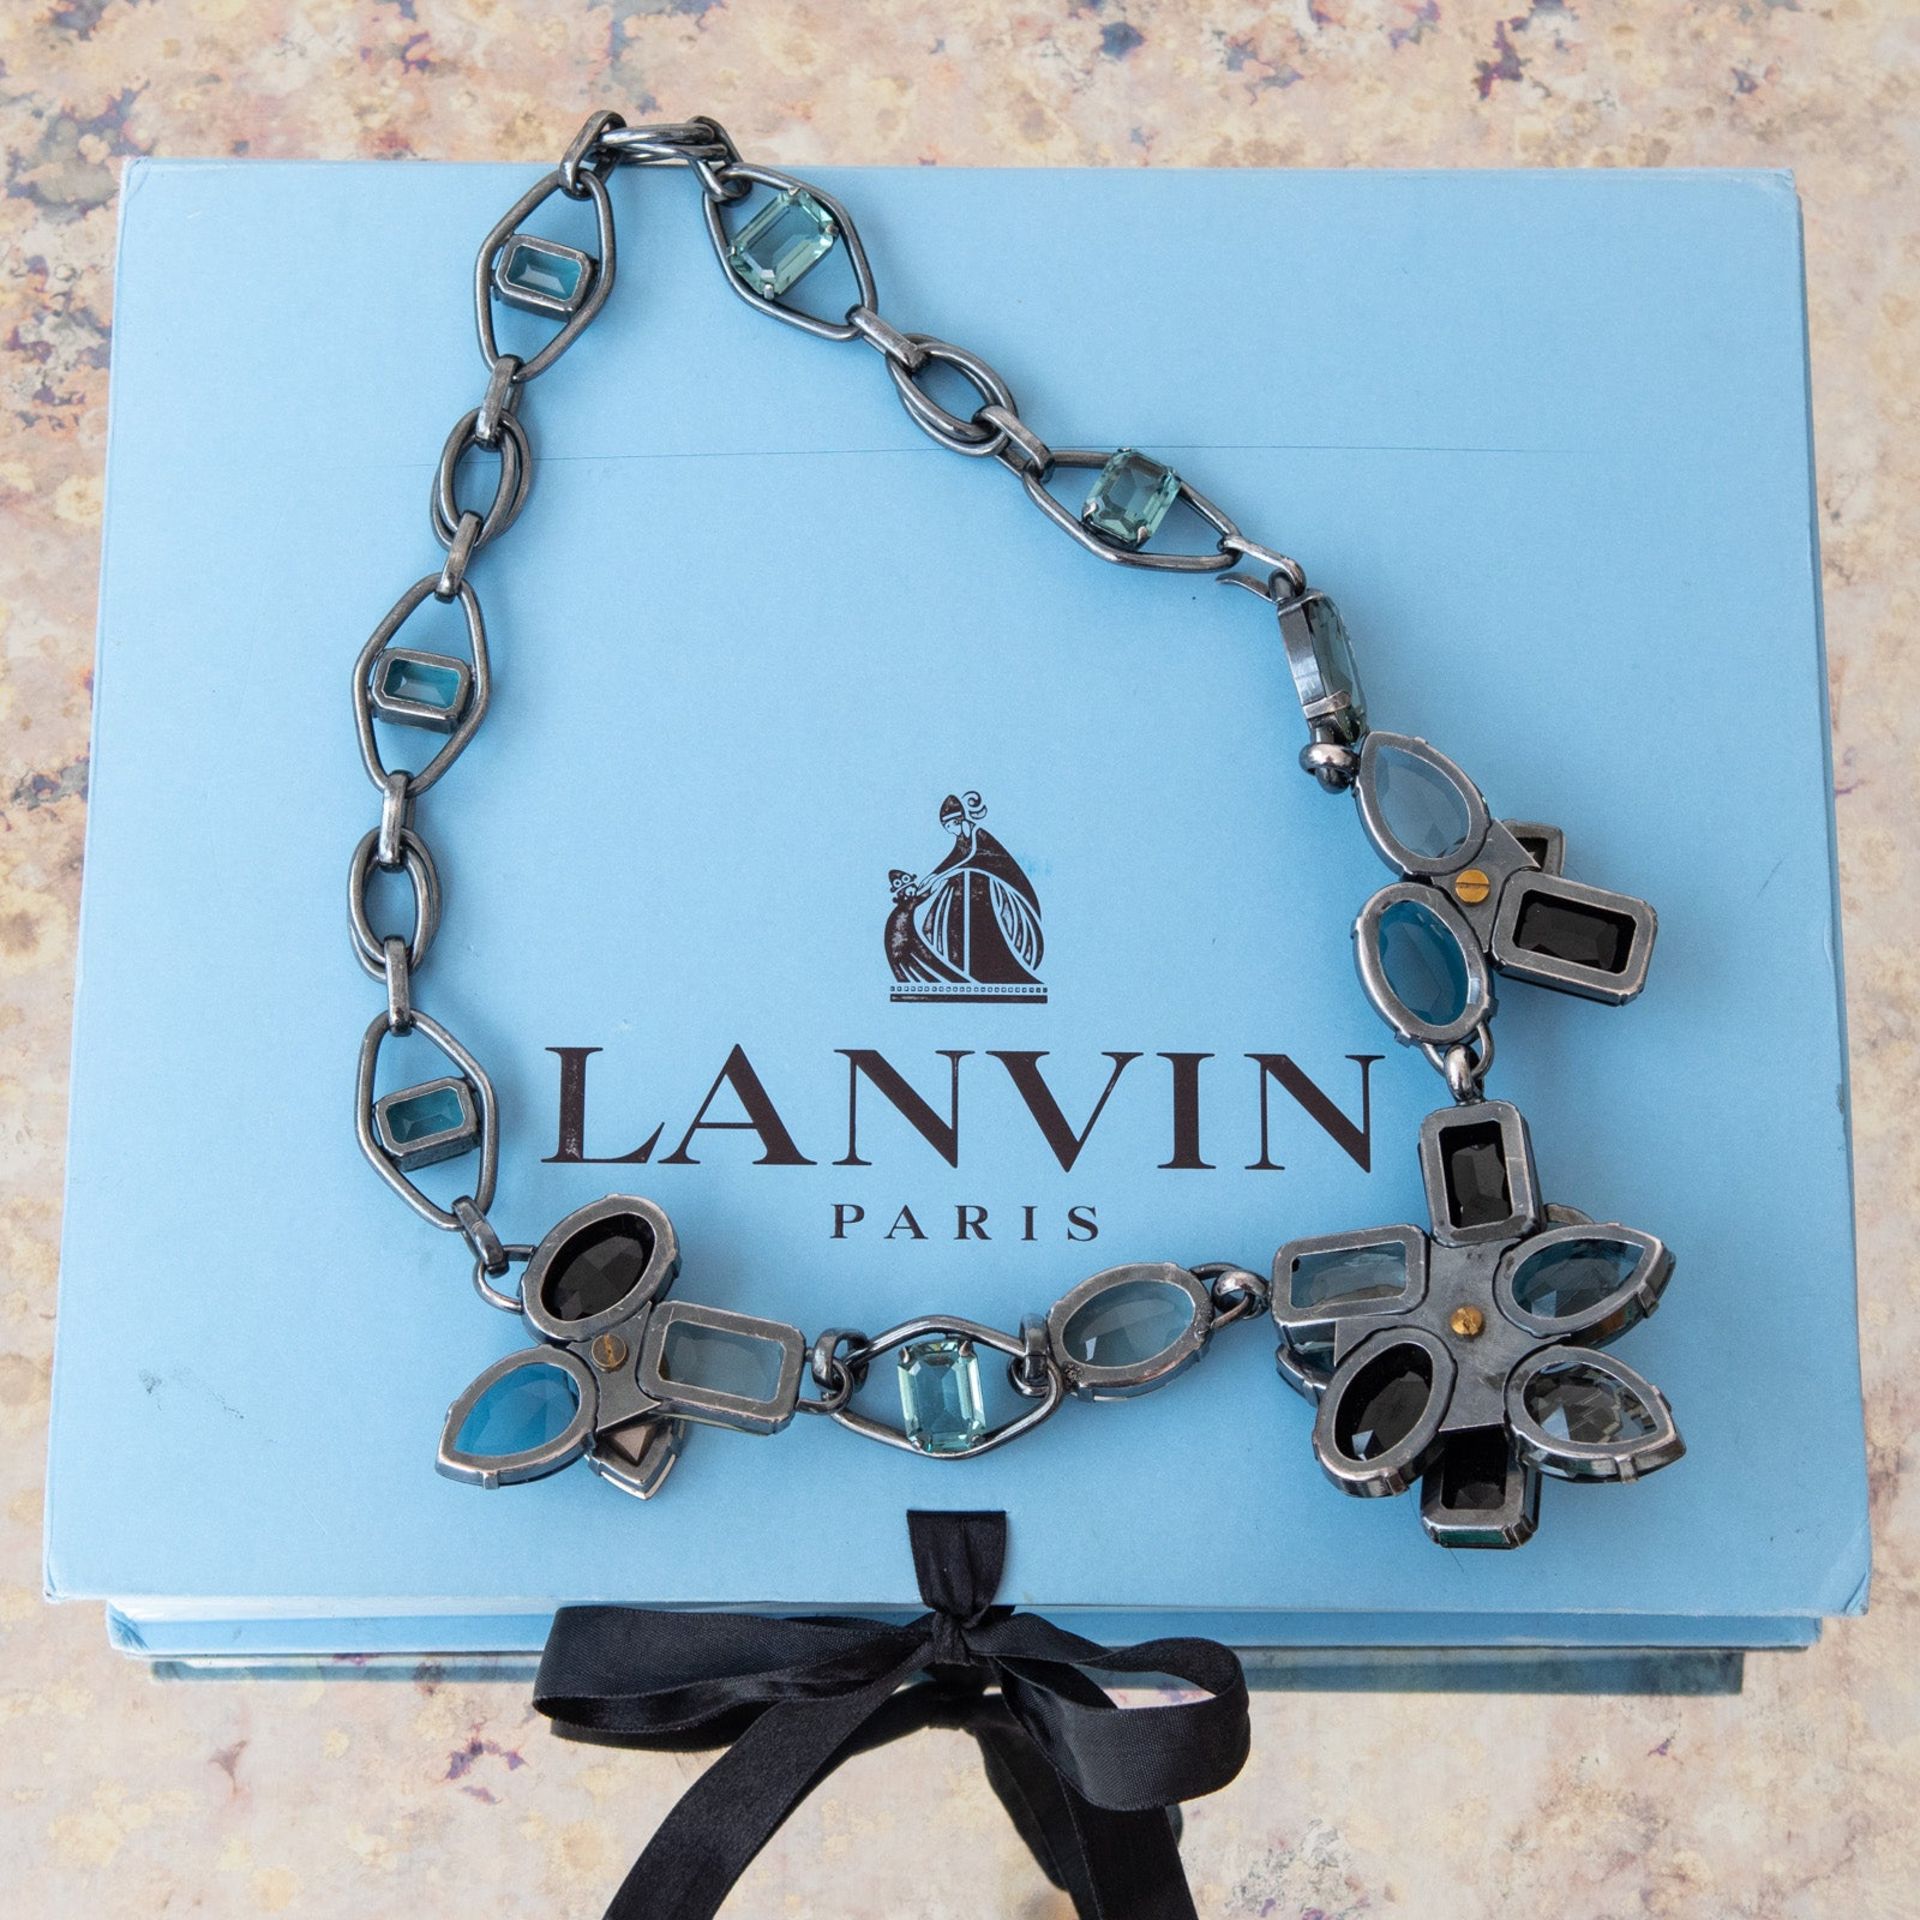 Lanvin Collar Necklace - Image 6 of 8